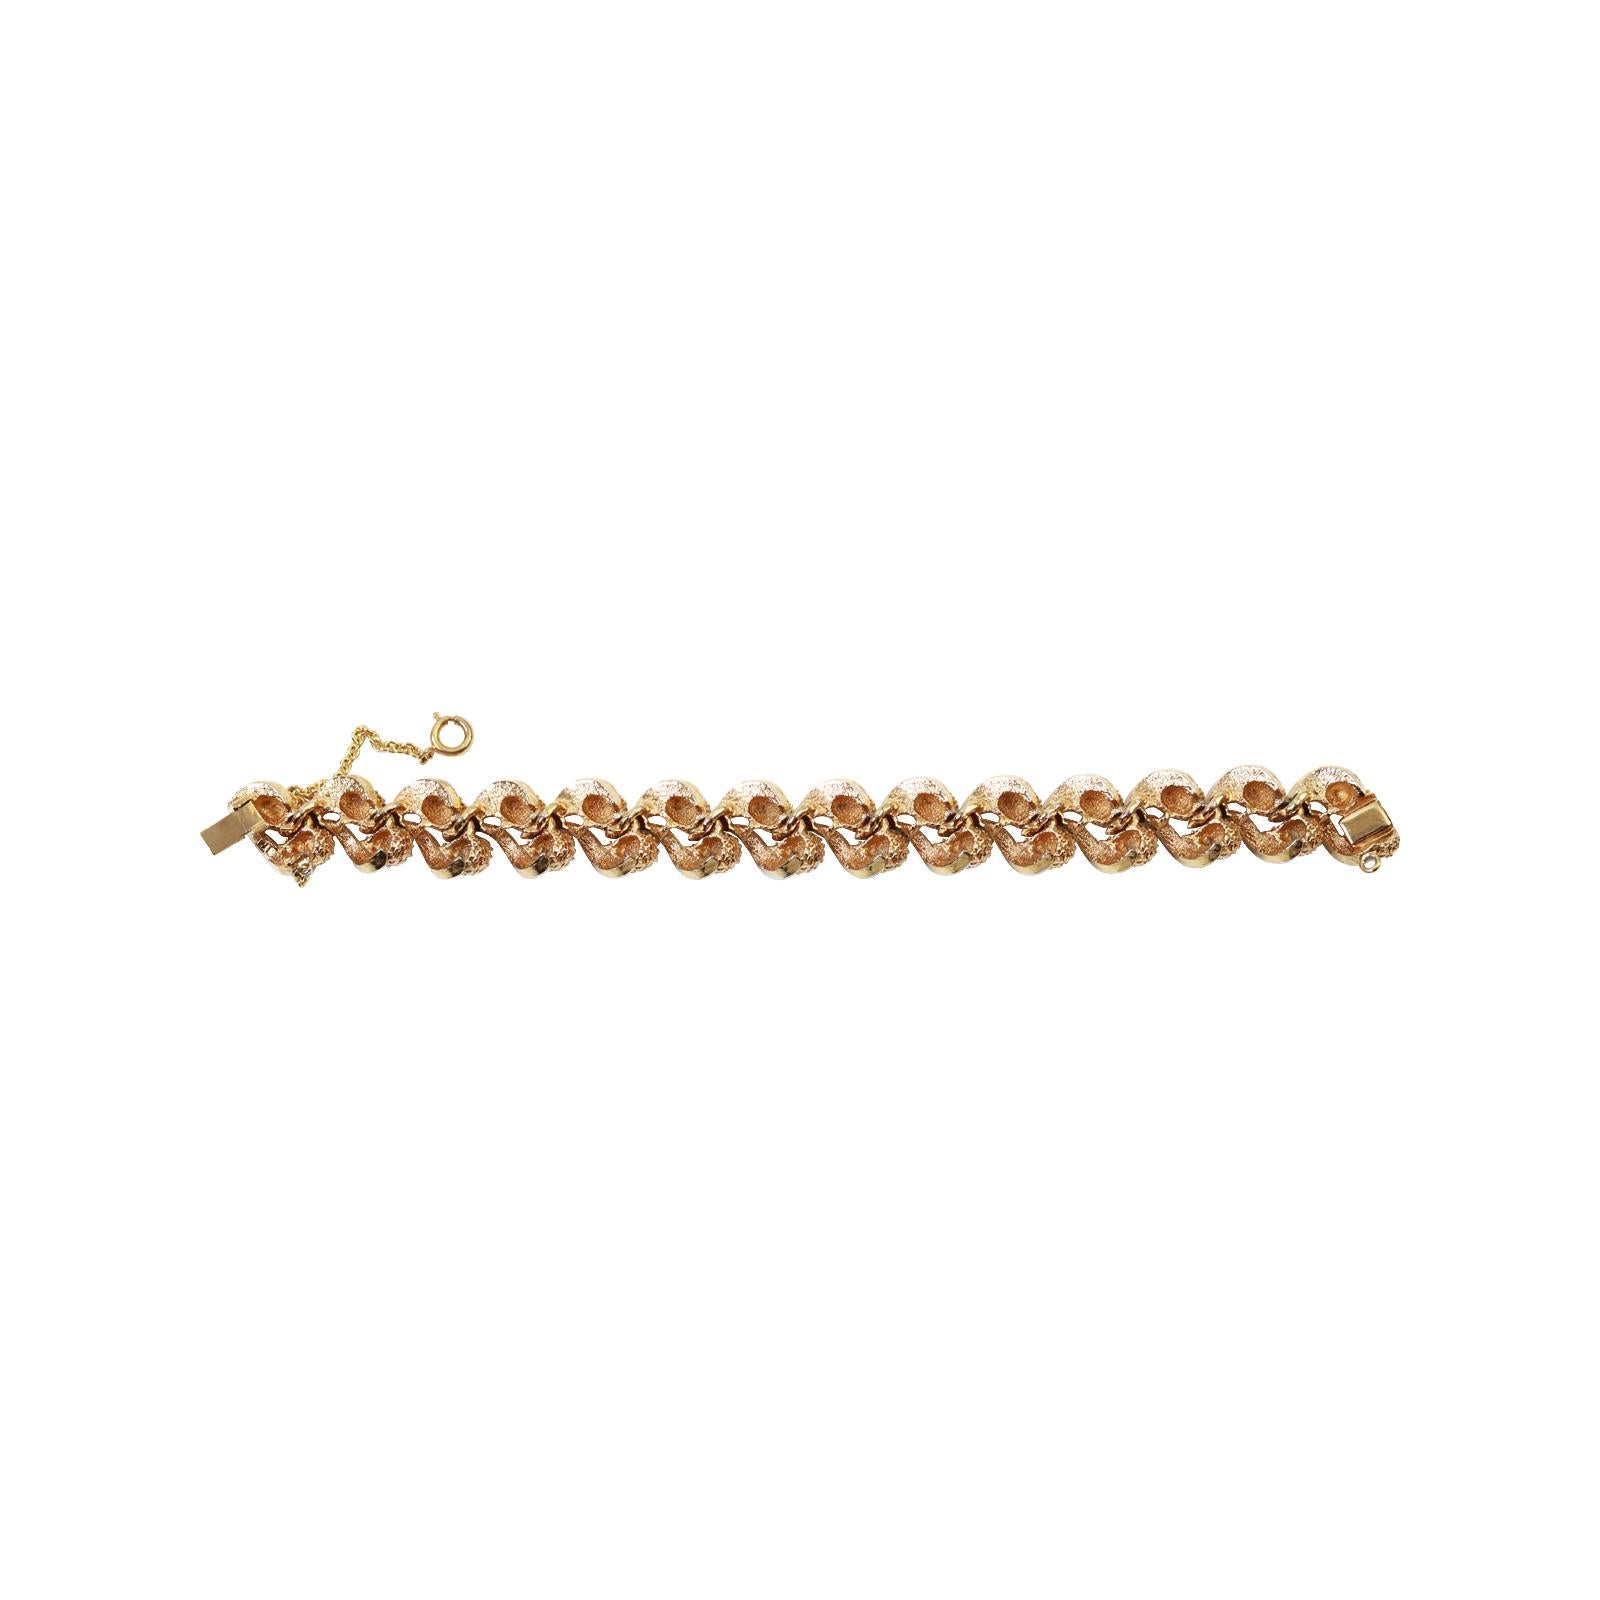 Vintage Panetta Gold Braided Bracelet with Clear Pave Stones Circa 1960s For Sale 2